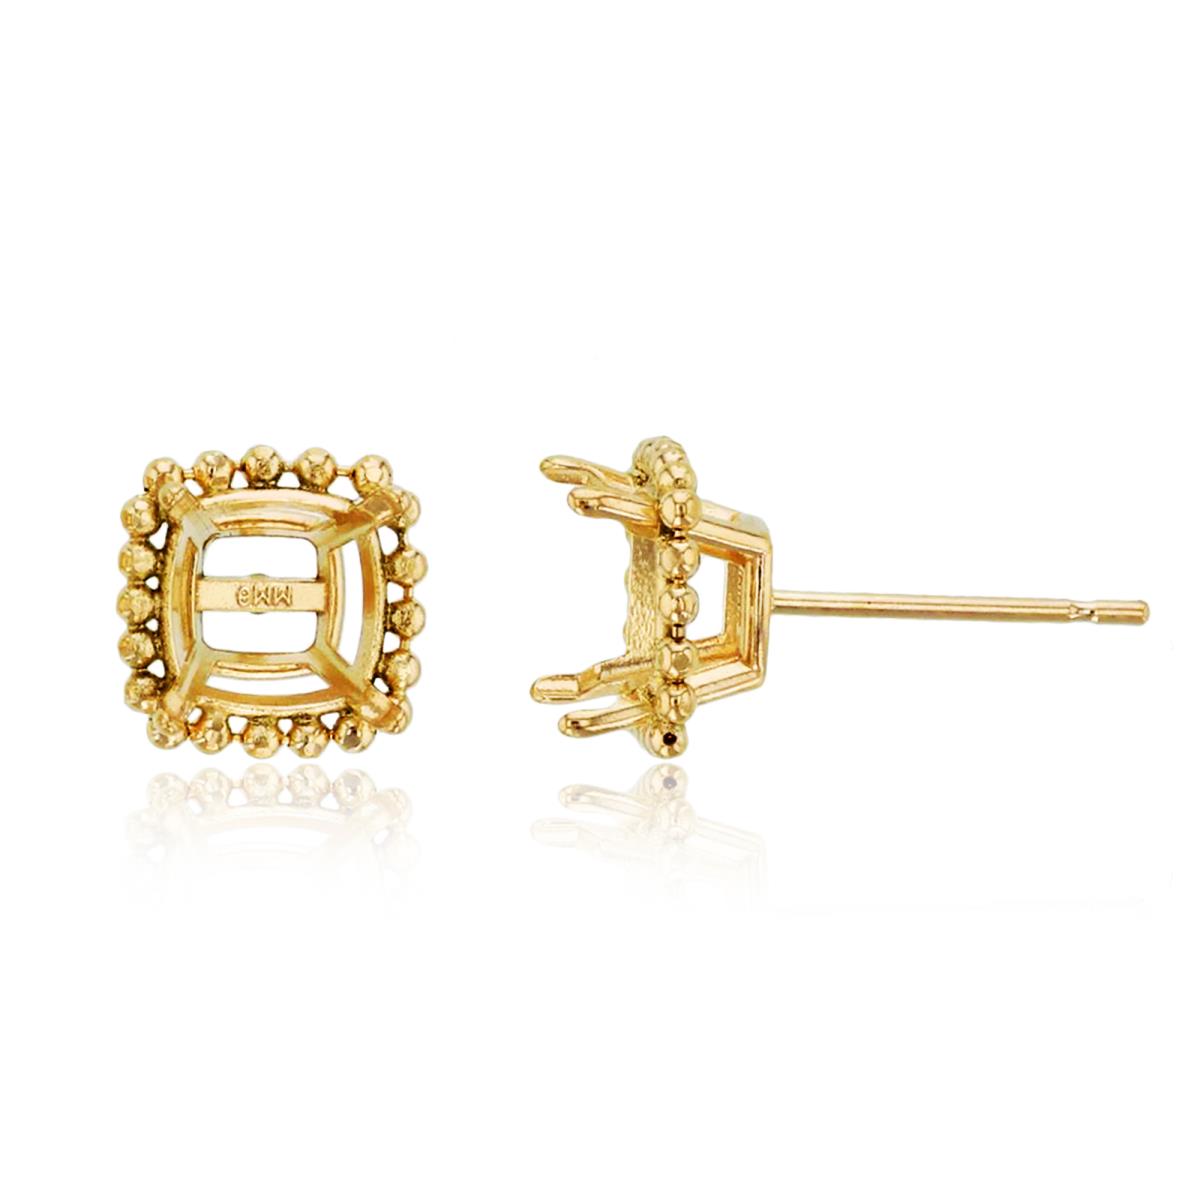 10K Yellow Gold 6x6mm Cushion 4-Prong Basket with Bead Frame Stud Earring Finding (PR)